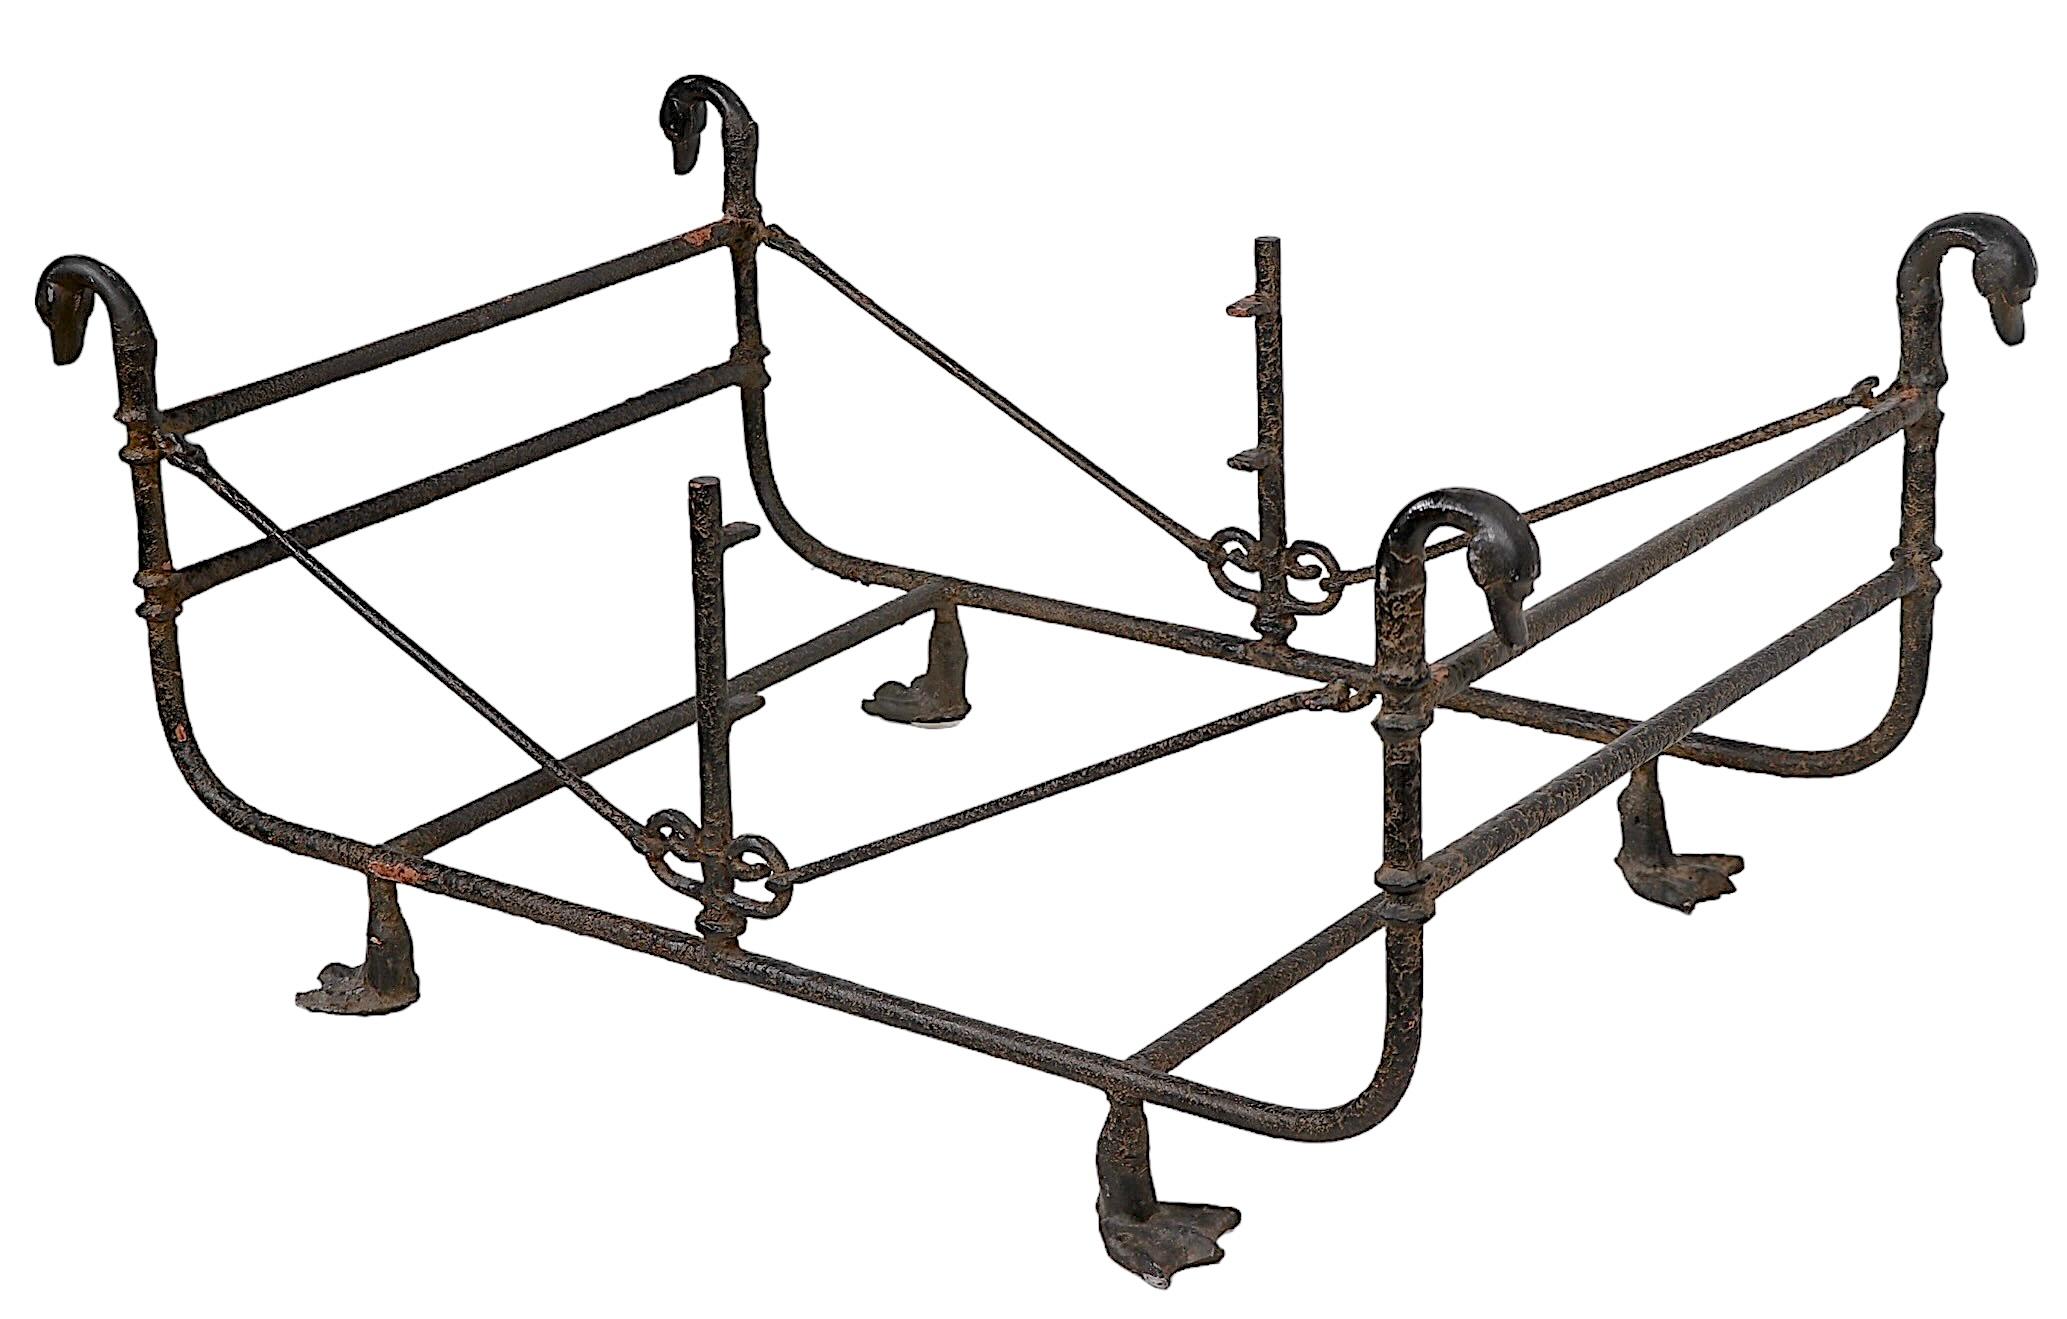 Wrought Iron and Glass Etruscan Coffee Table bib Paul Ferrante  after Giacometti For Sale 3